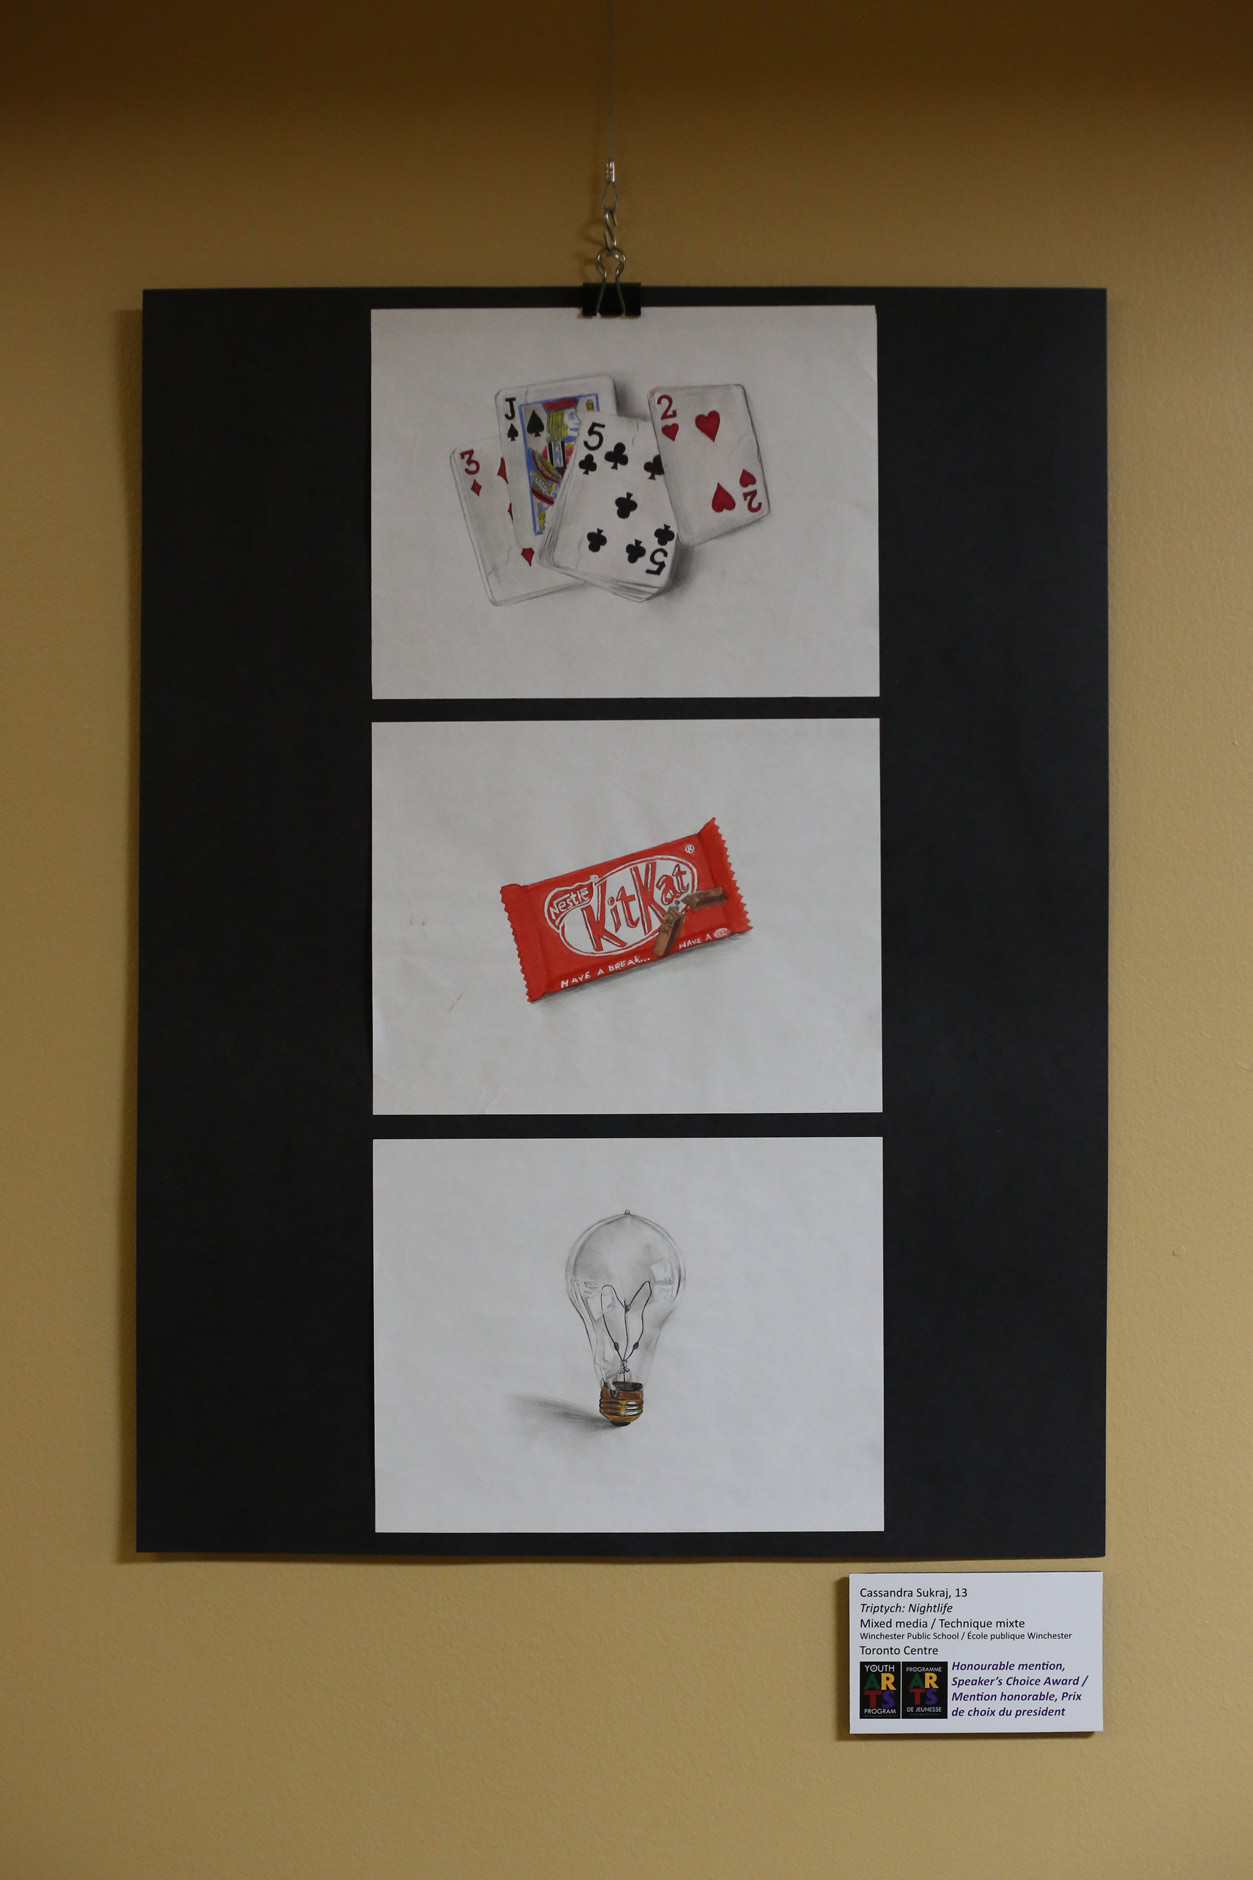 A drawing by a student artist in the 2015 Youth Arts Program.